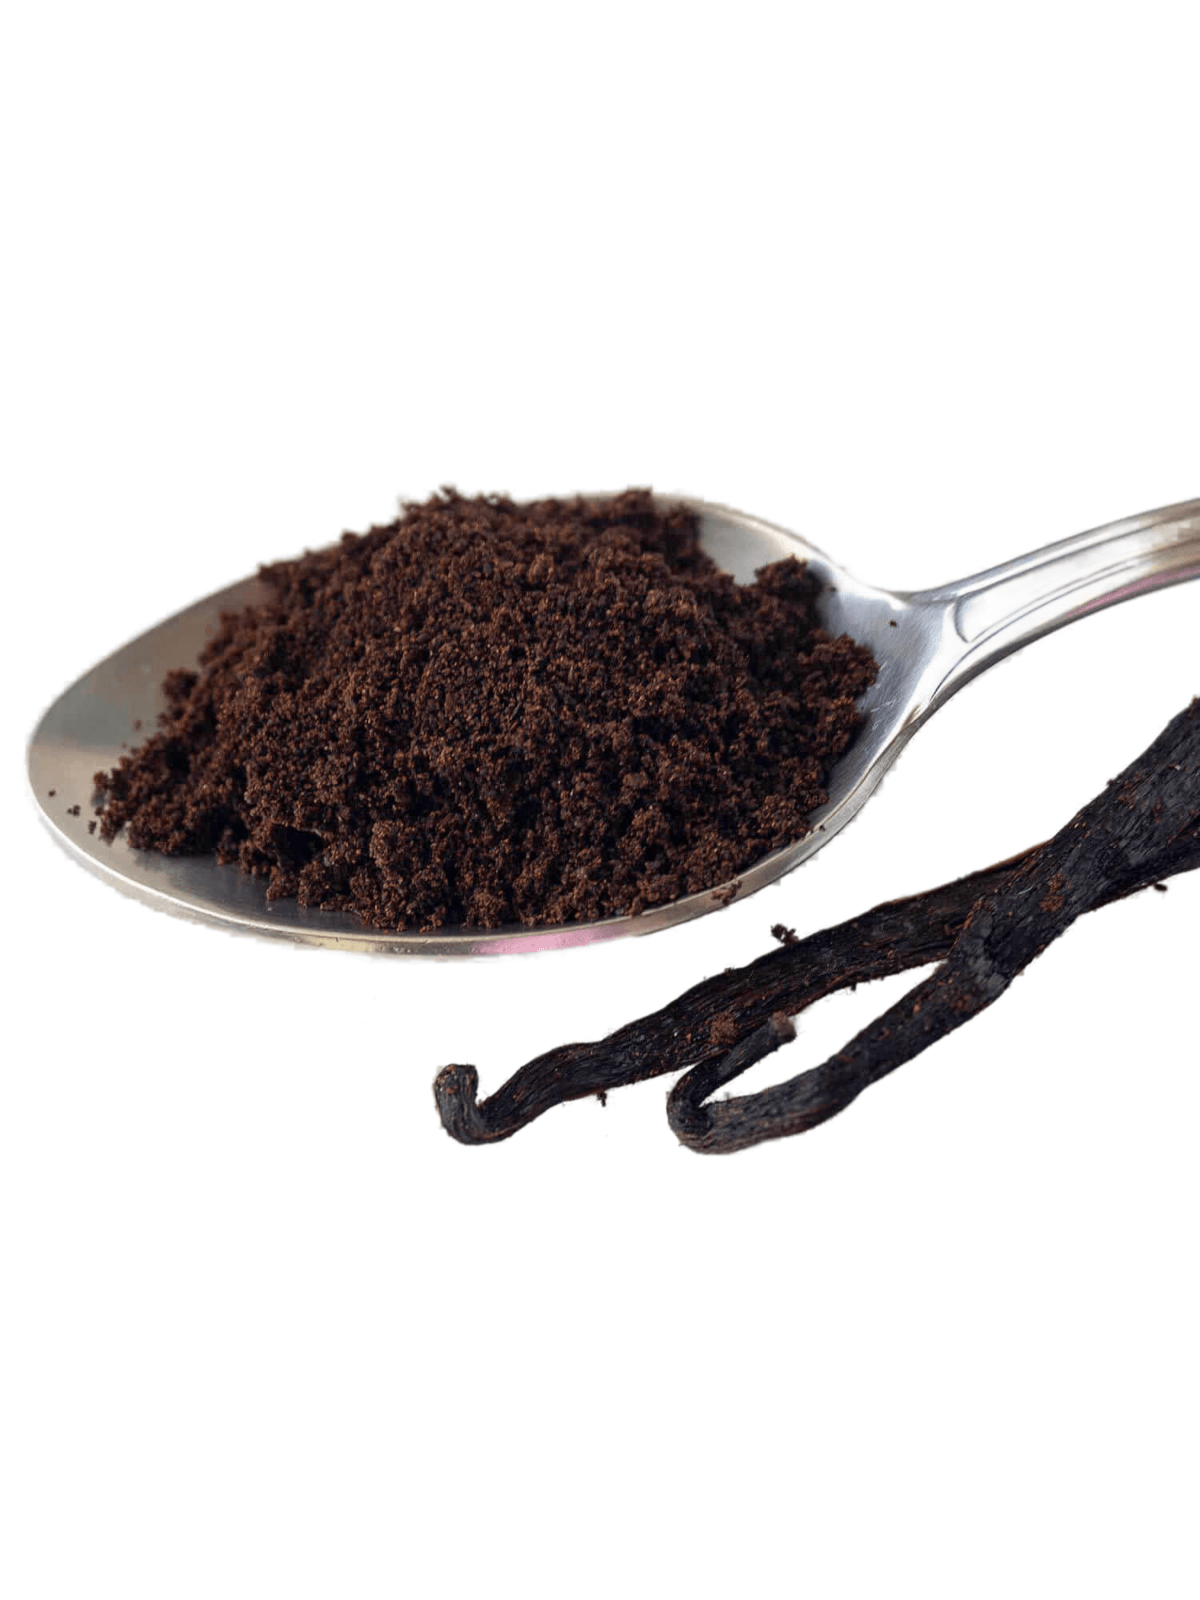 Co-op Pricing Ugandan Gourmet Ground Vanilla Bean Powder (Per Ounce)<br><br>Minimum Order quantity for this Co-op price is 2 ounces.